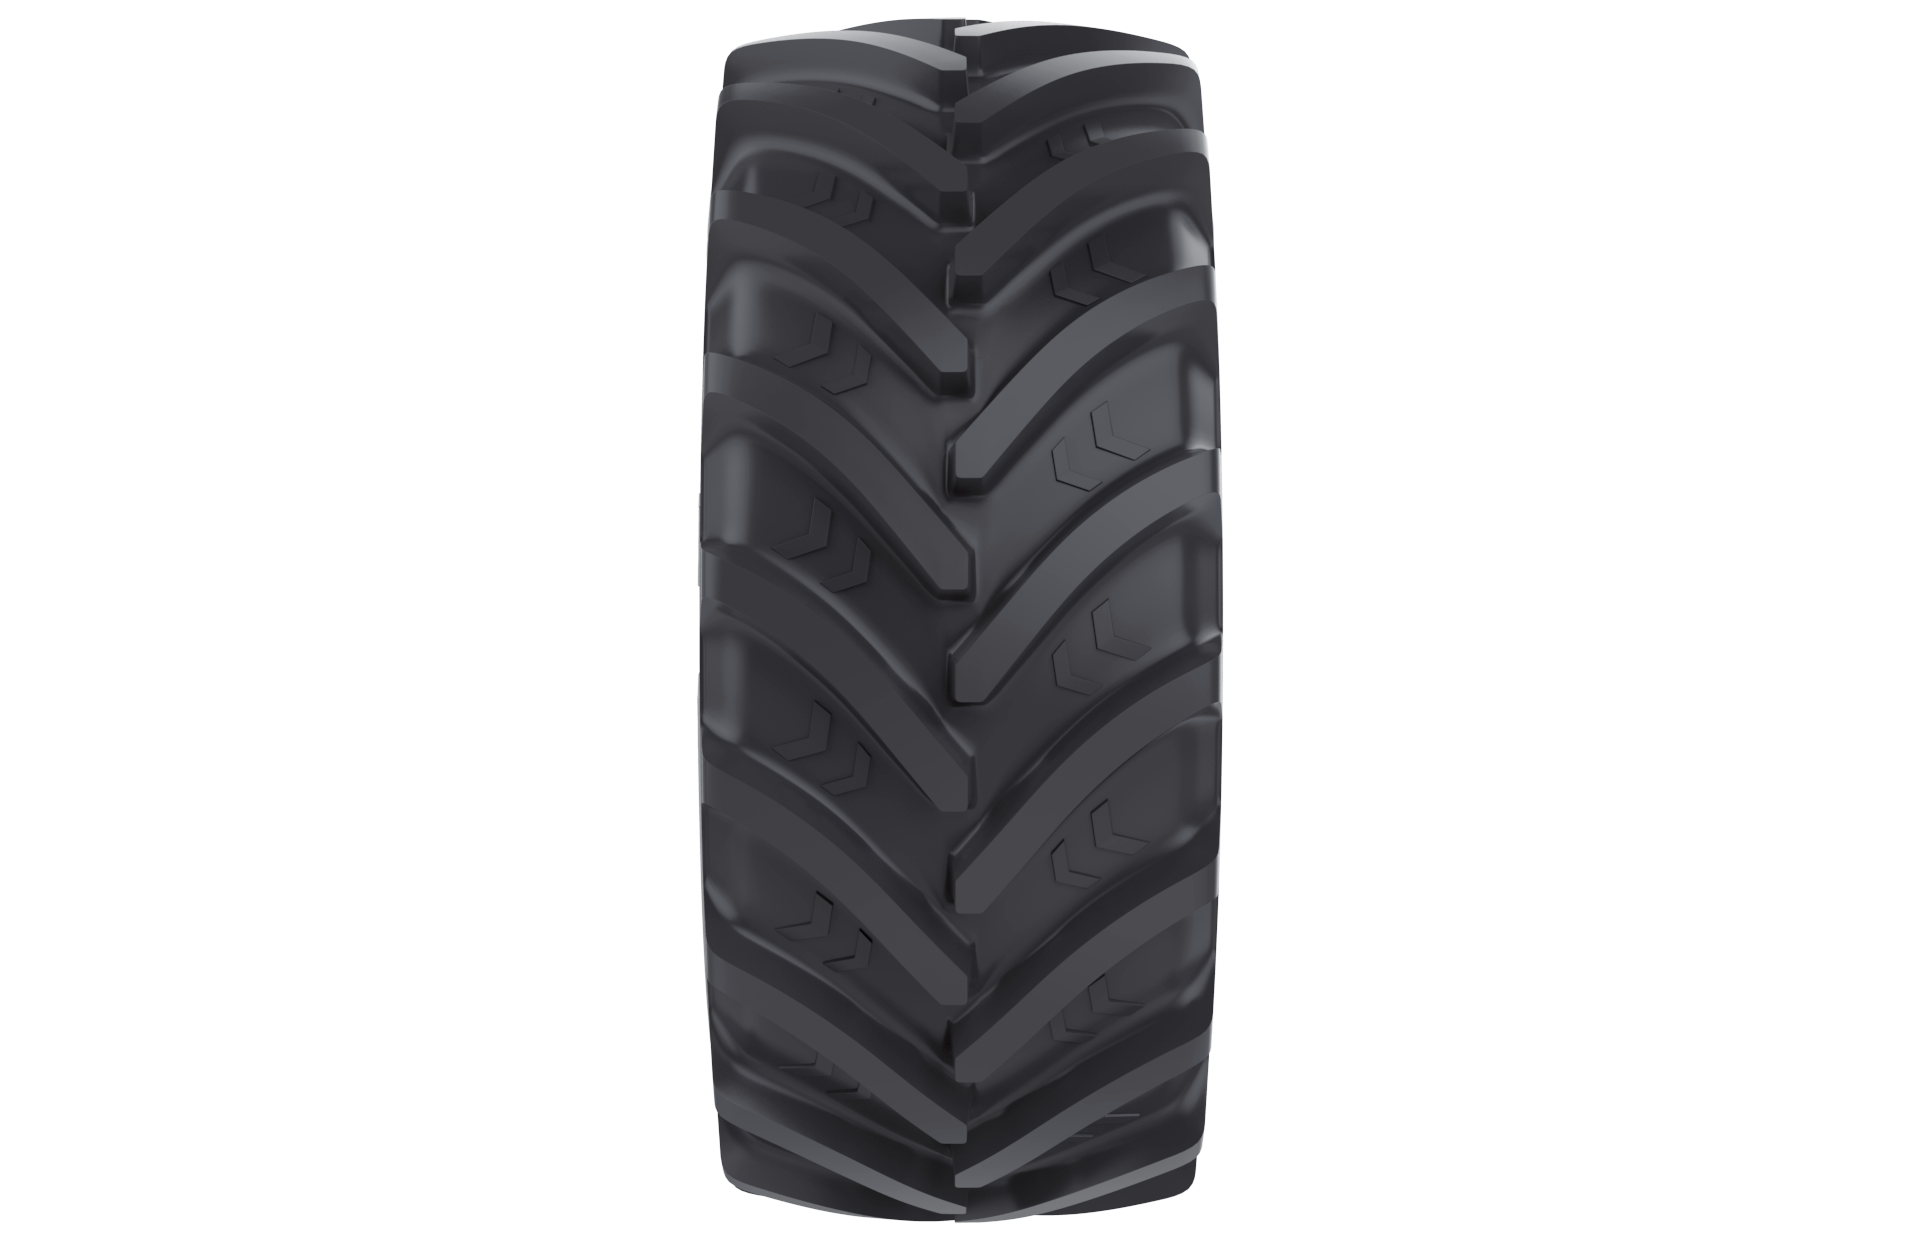 ASCENSO VF 600/65R28 NRO 163D R1-W TL VDR2000 STEEL BELTED